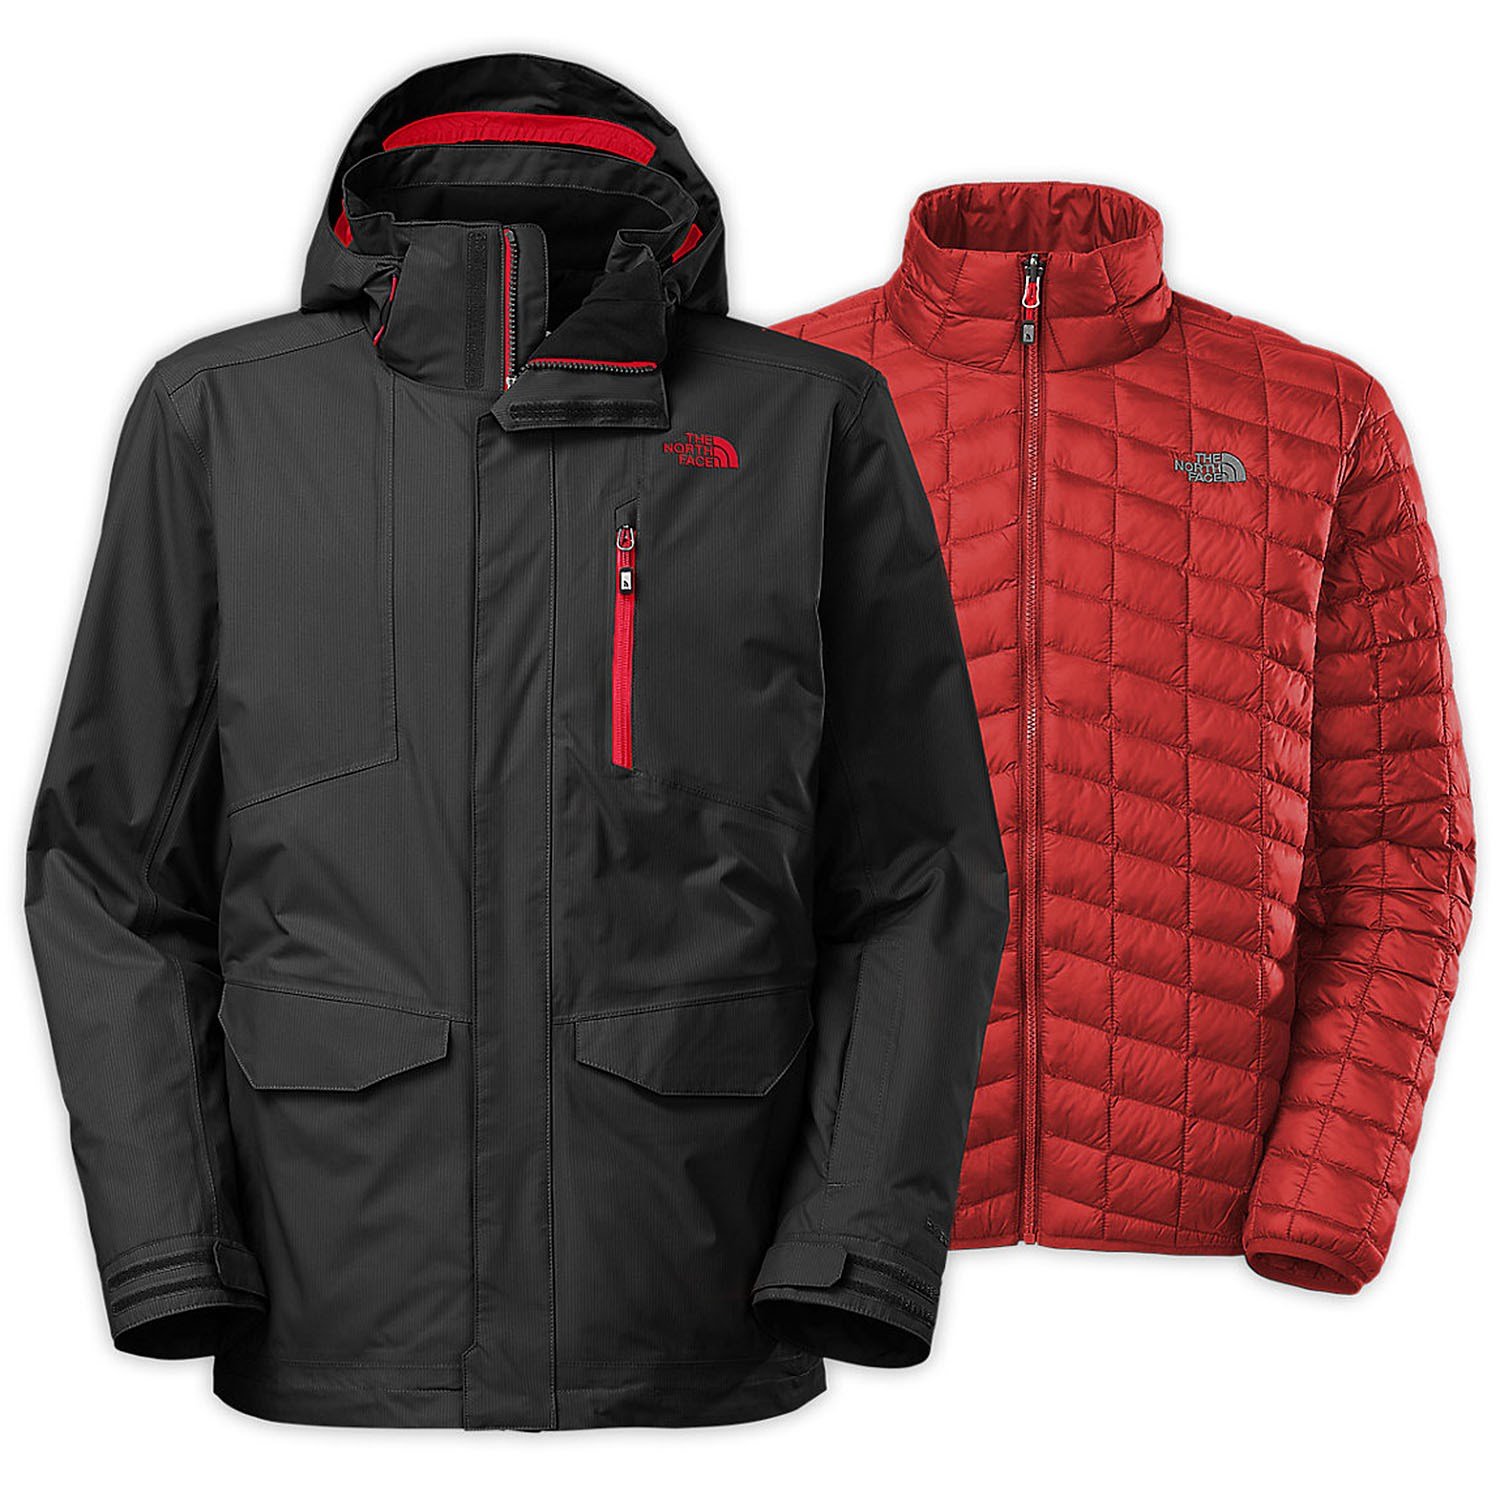 north face snow triclimate jacket